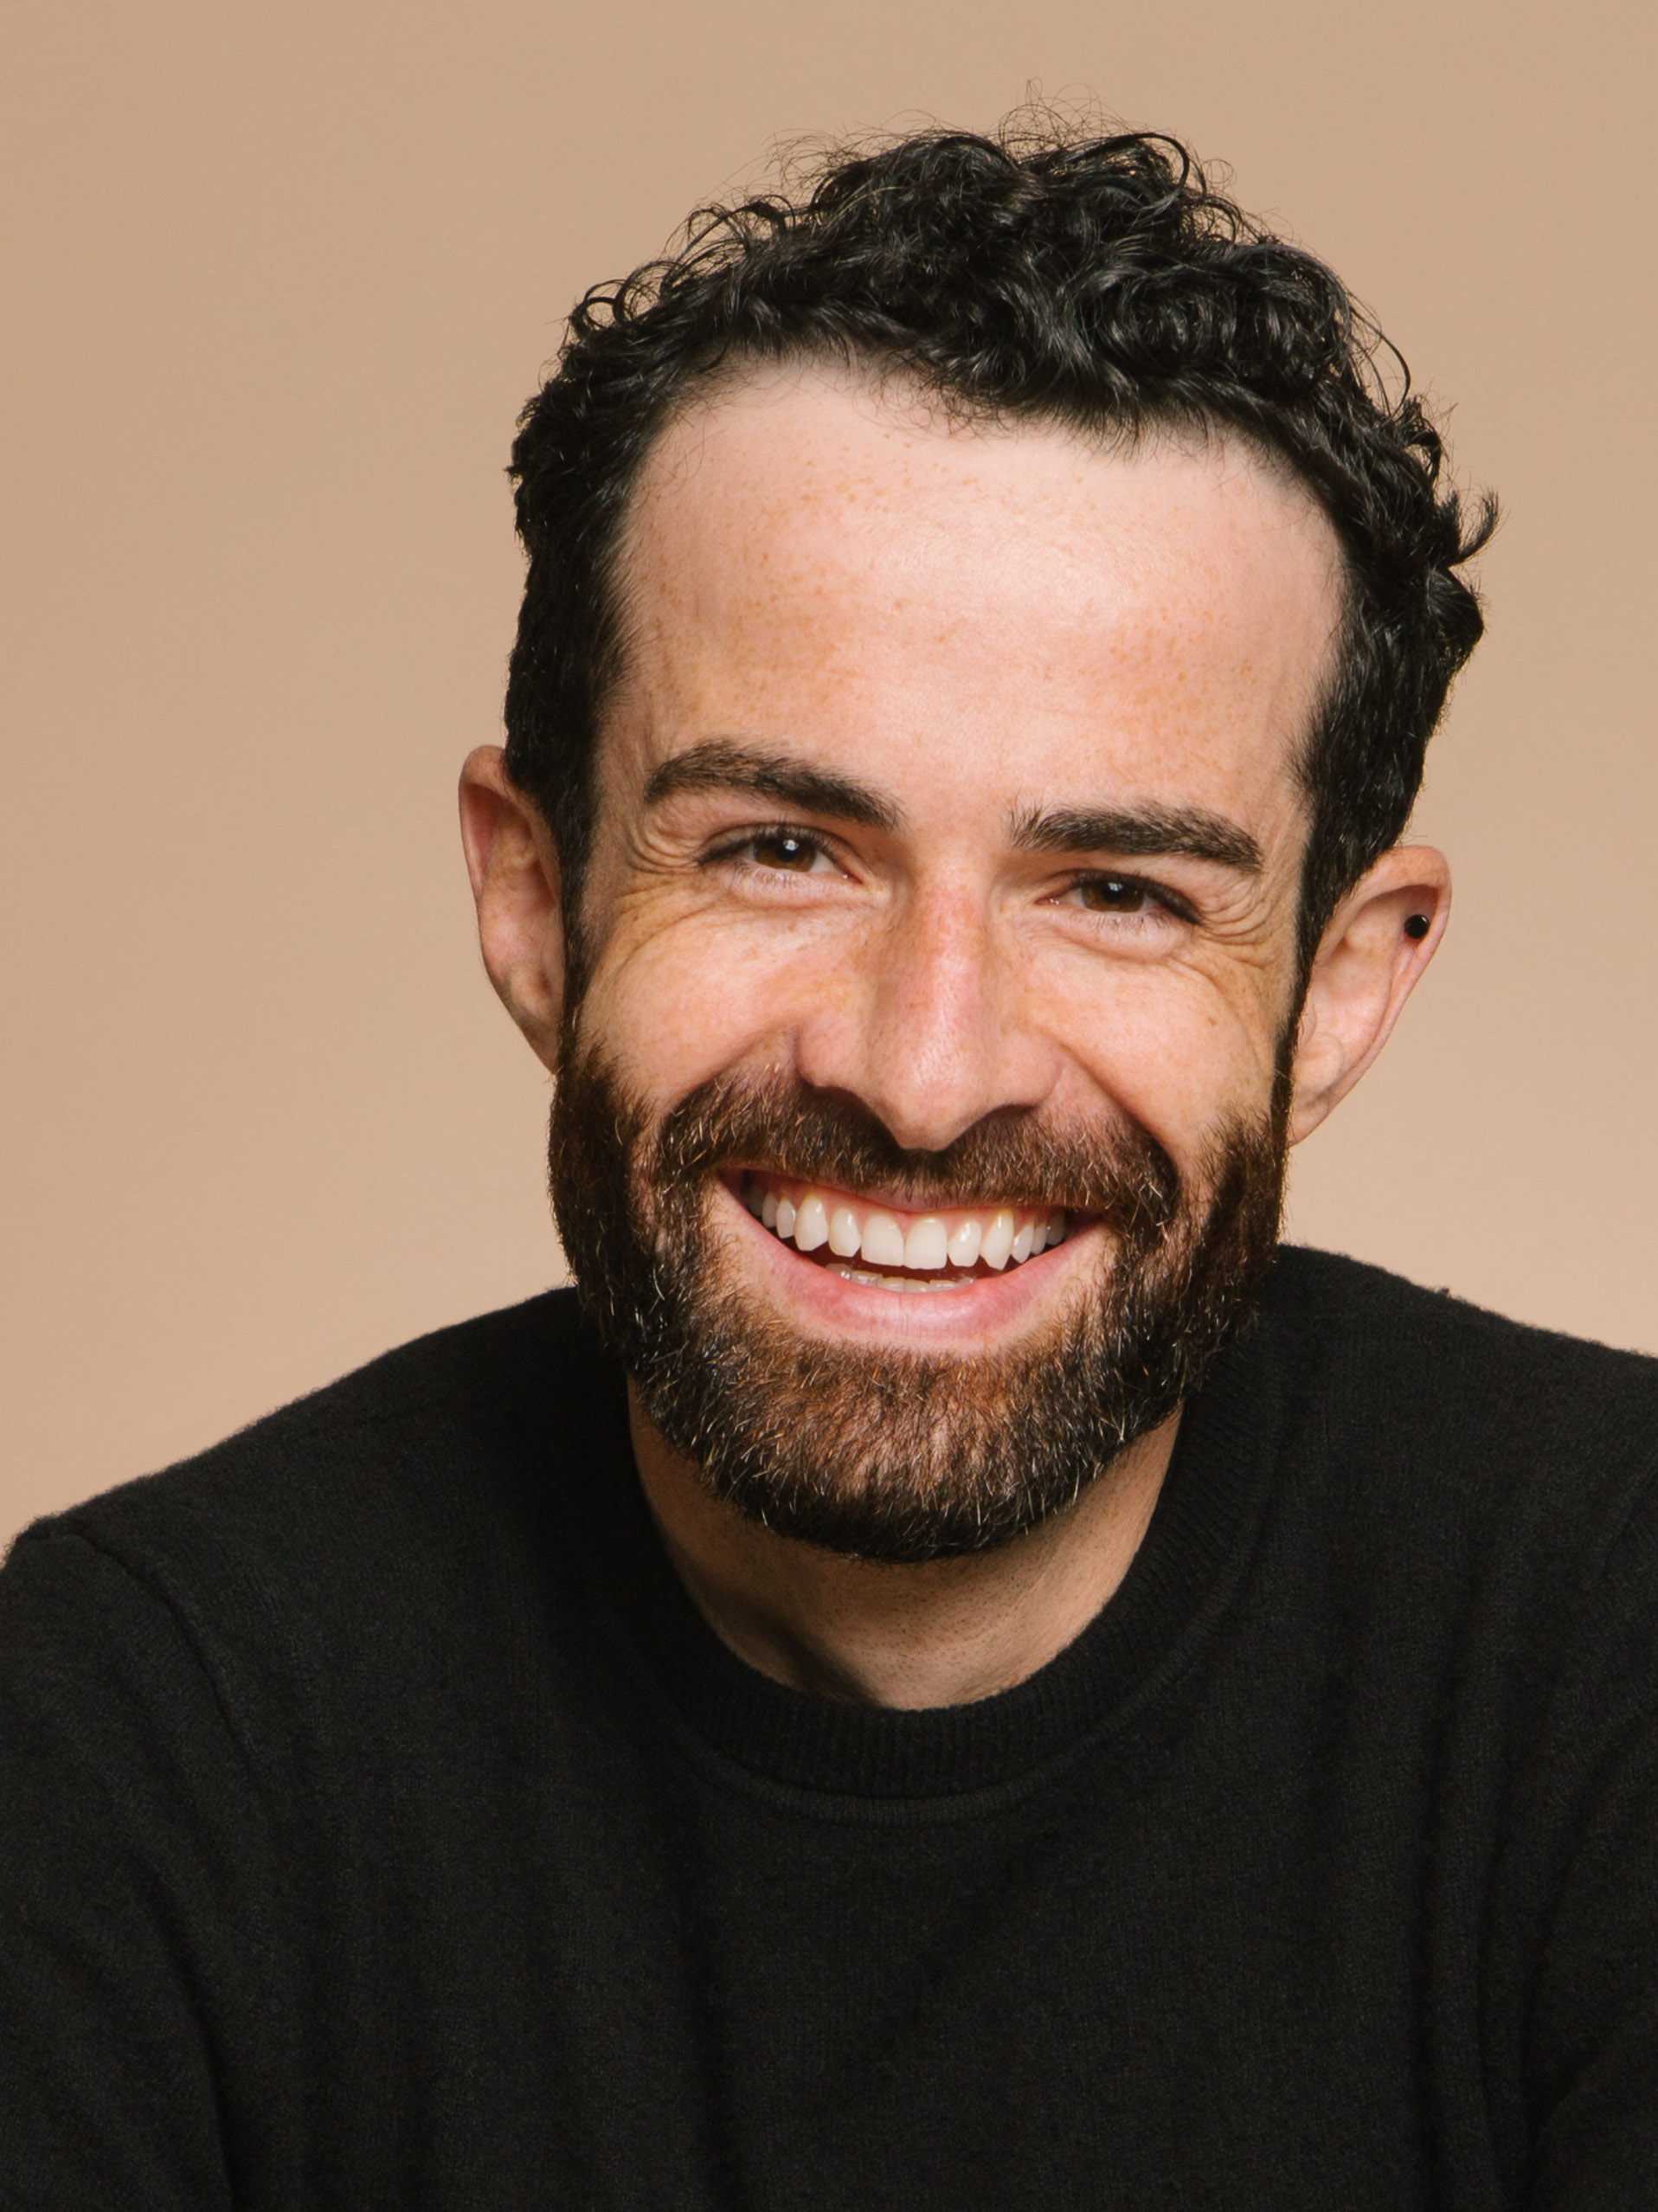 A portrait of a cheerful man with a curly hair and beard, smiling widely, showing white teeth. He has dark, short, curly hair, and a groomed beard. Freckles are visible on his face and he's wearing a black crew neck sweater. The background is a warm, neutral tone.